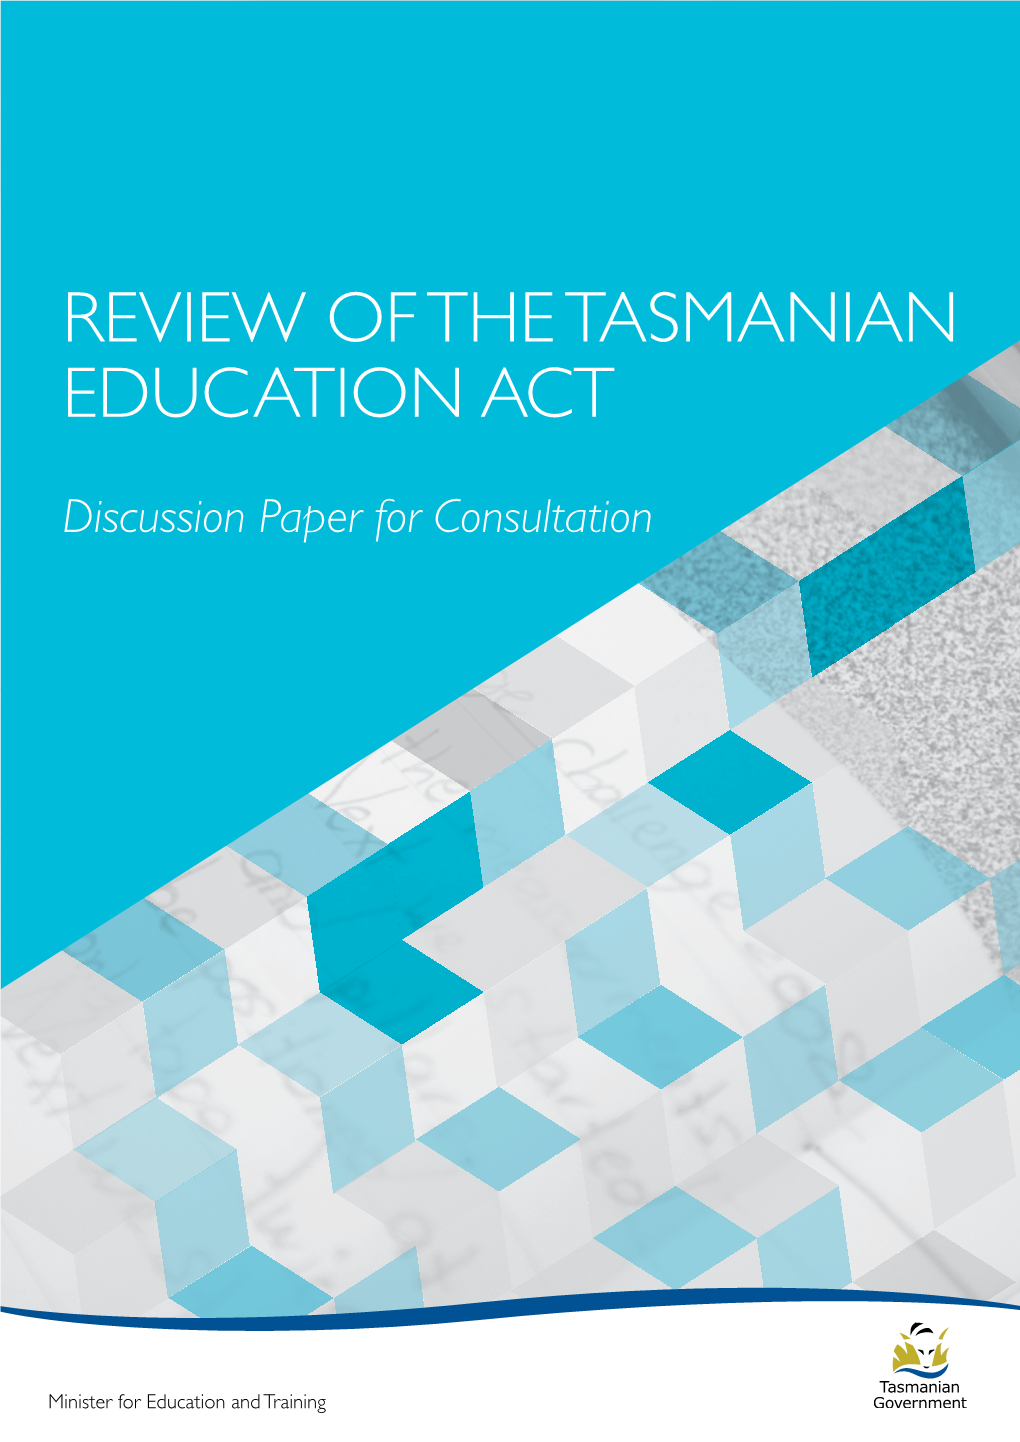 Review of the Tasmanian Education Act